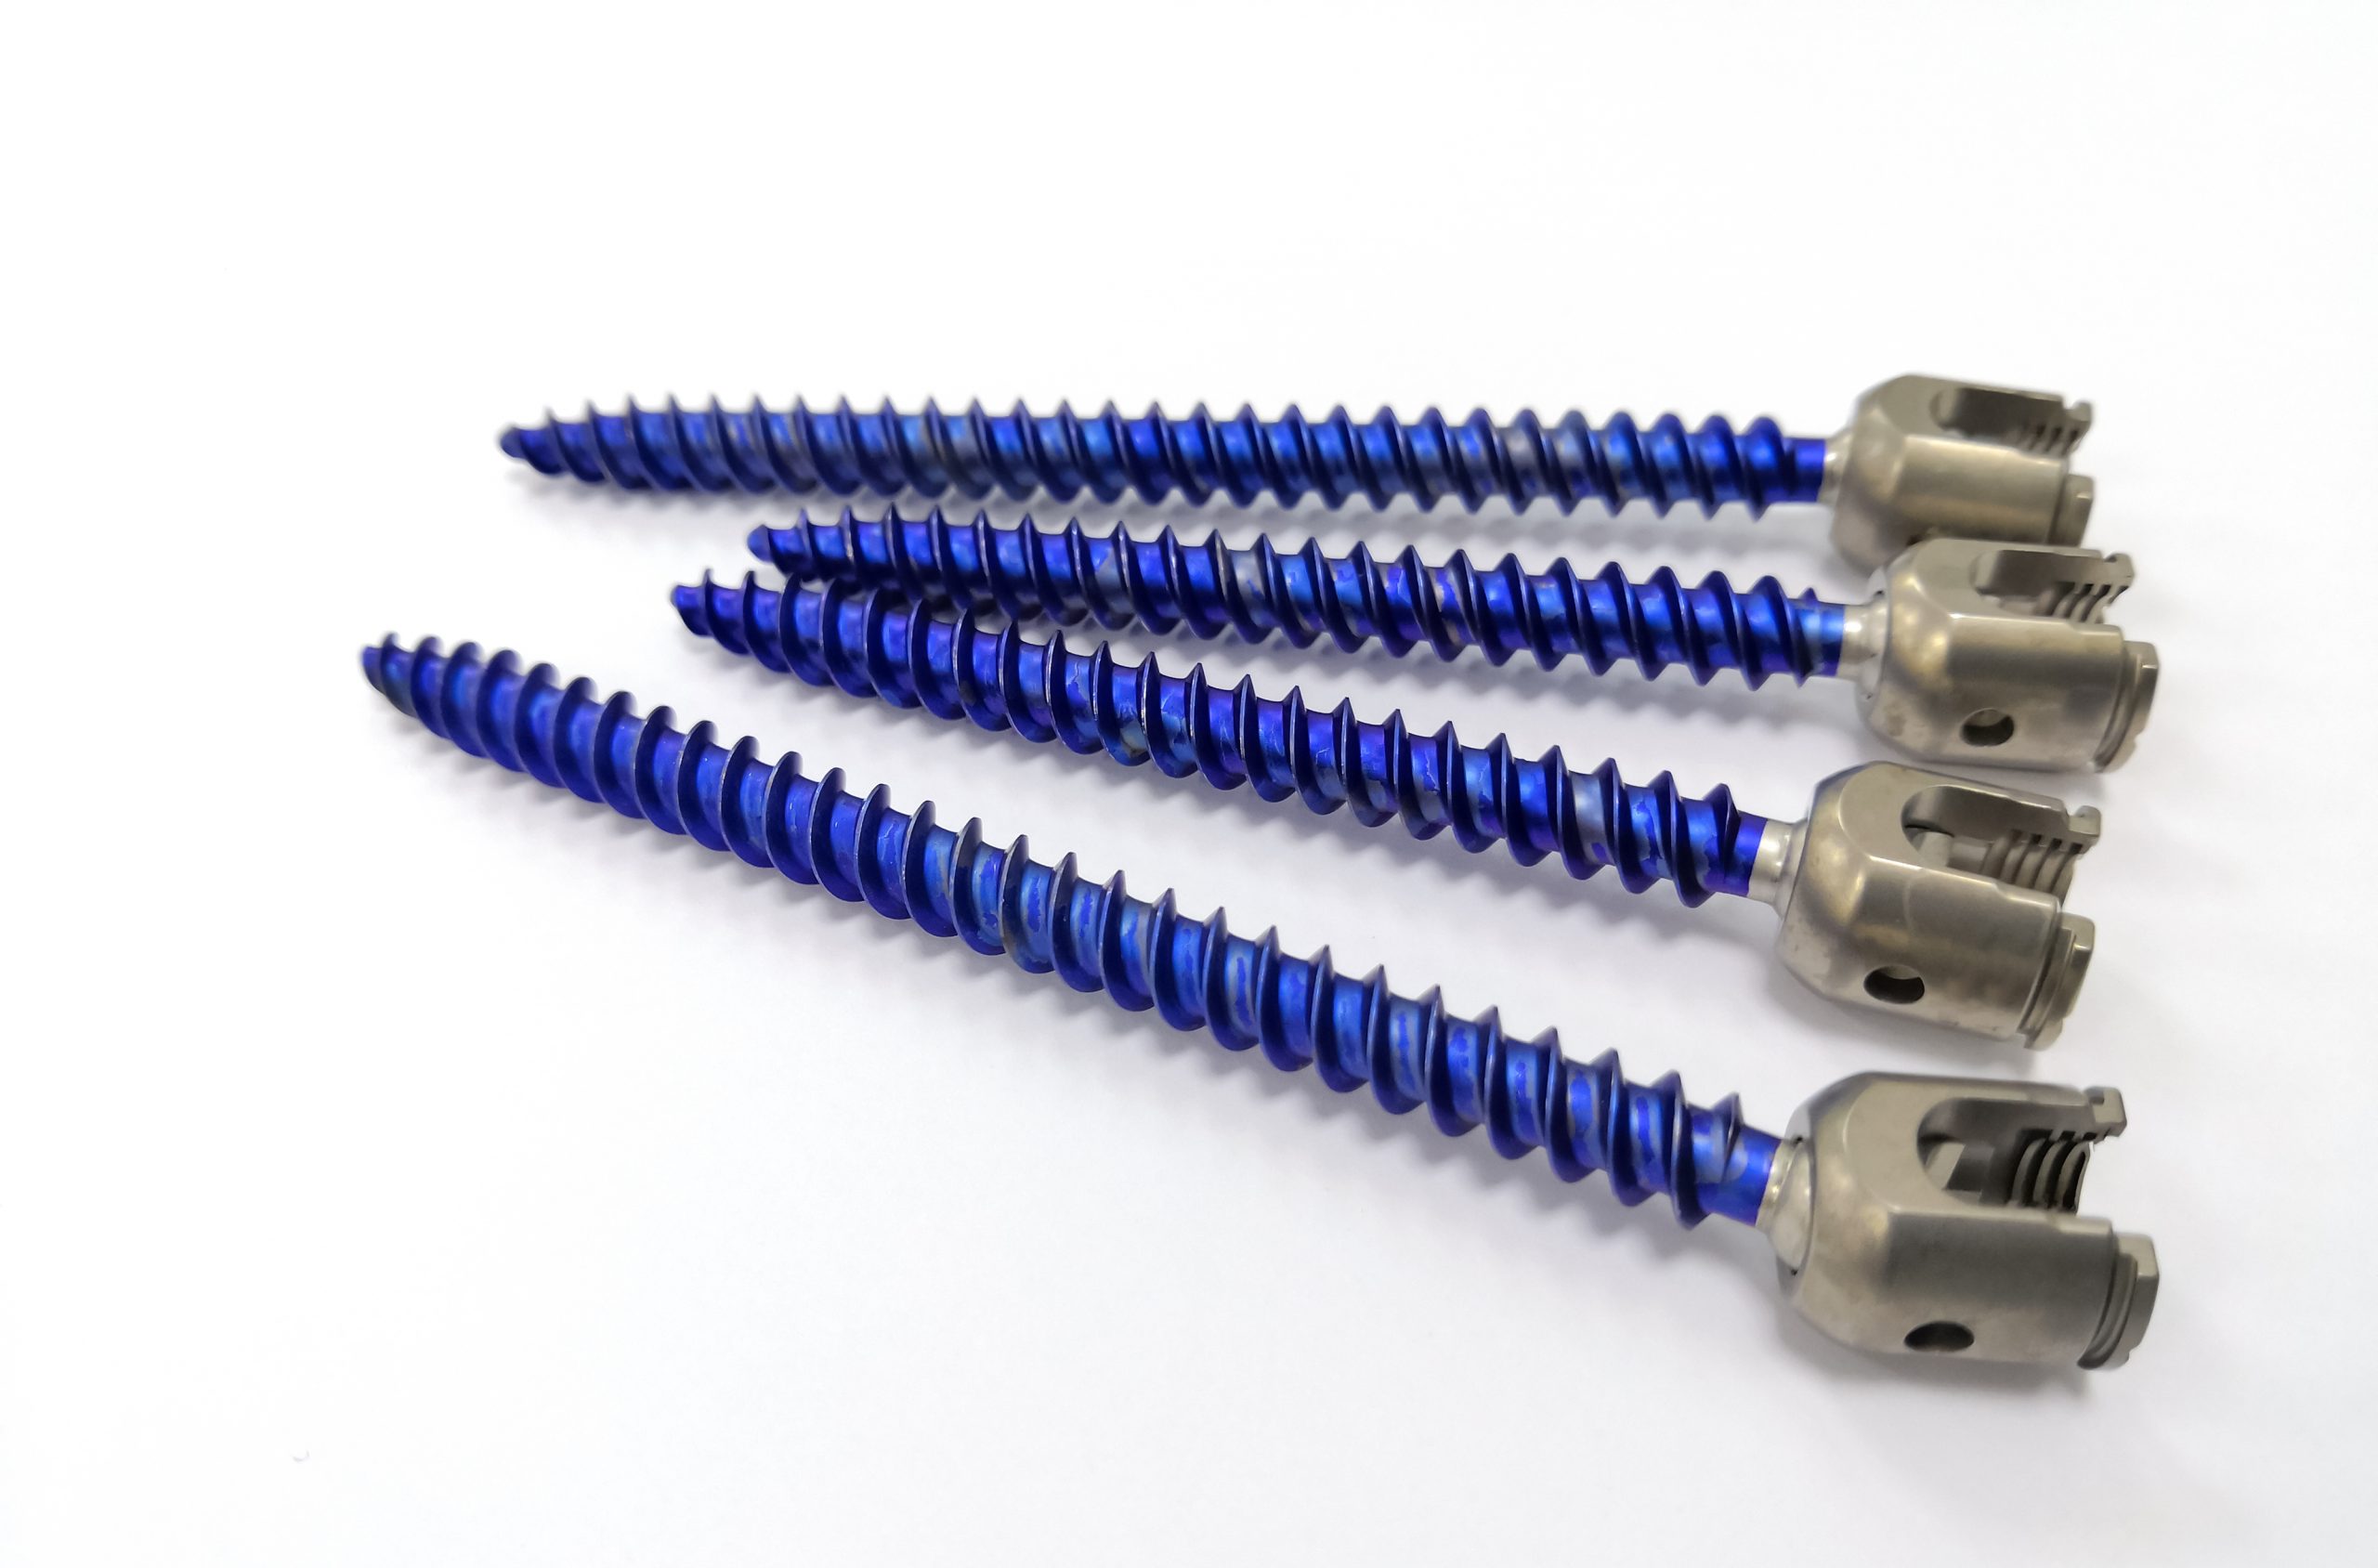 Set of four compression screws of different sizes.